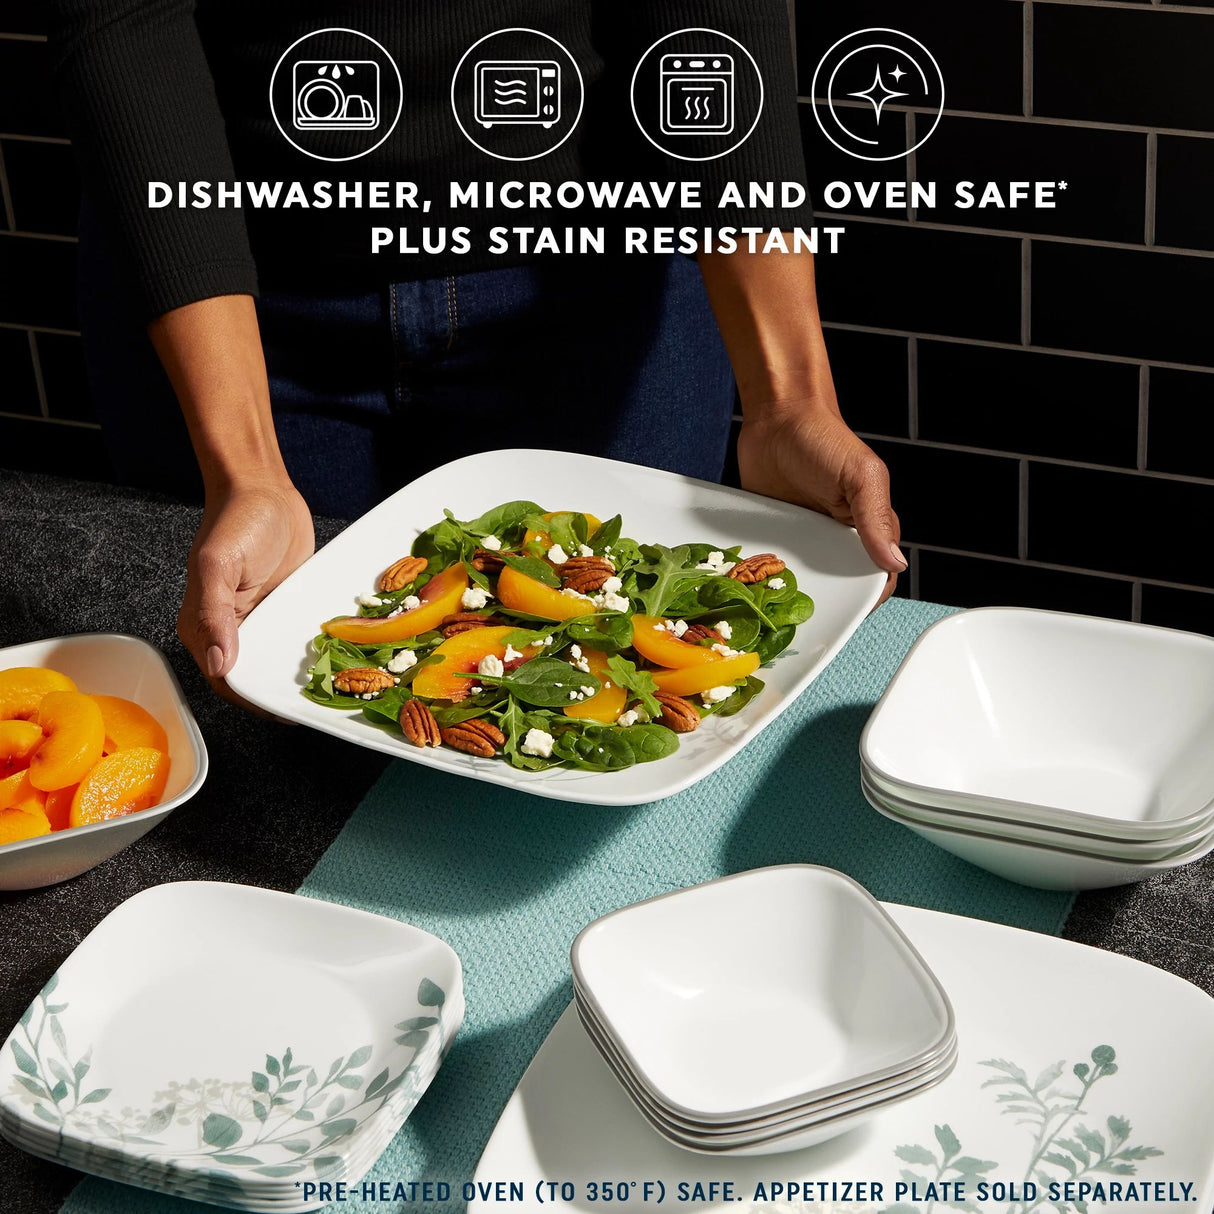  Square Amalie 16-piece Dinnerware Set on tabletop with text dishwasher, microwave, and oven safe plus stain resistant